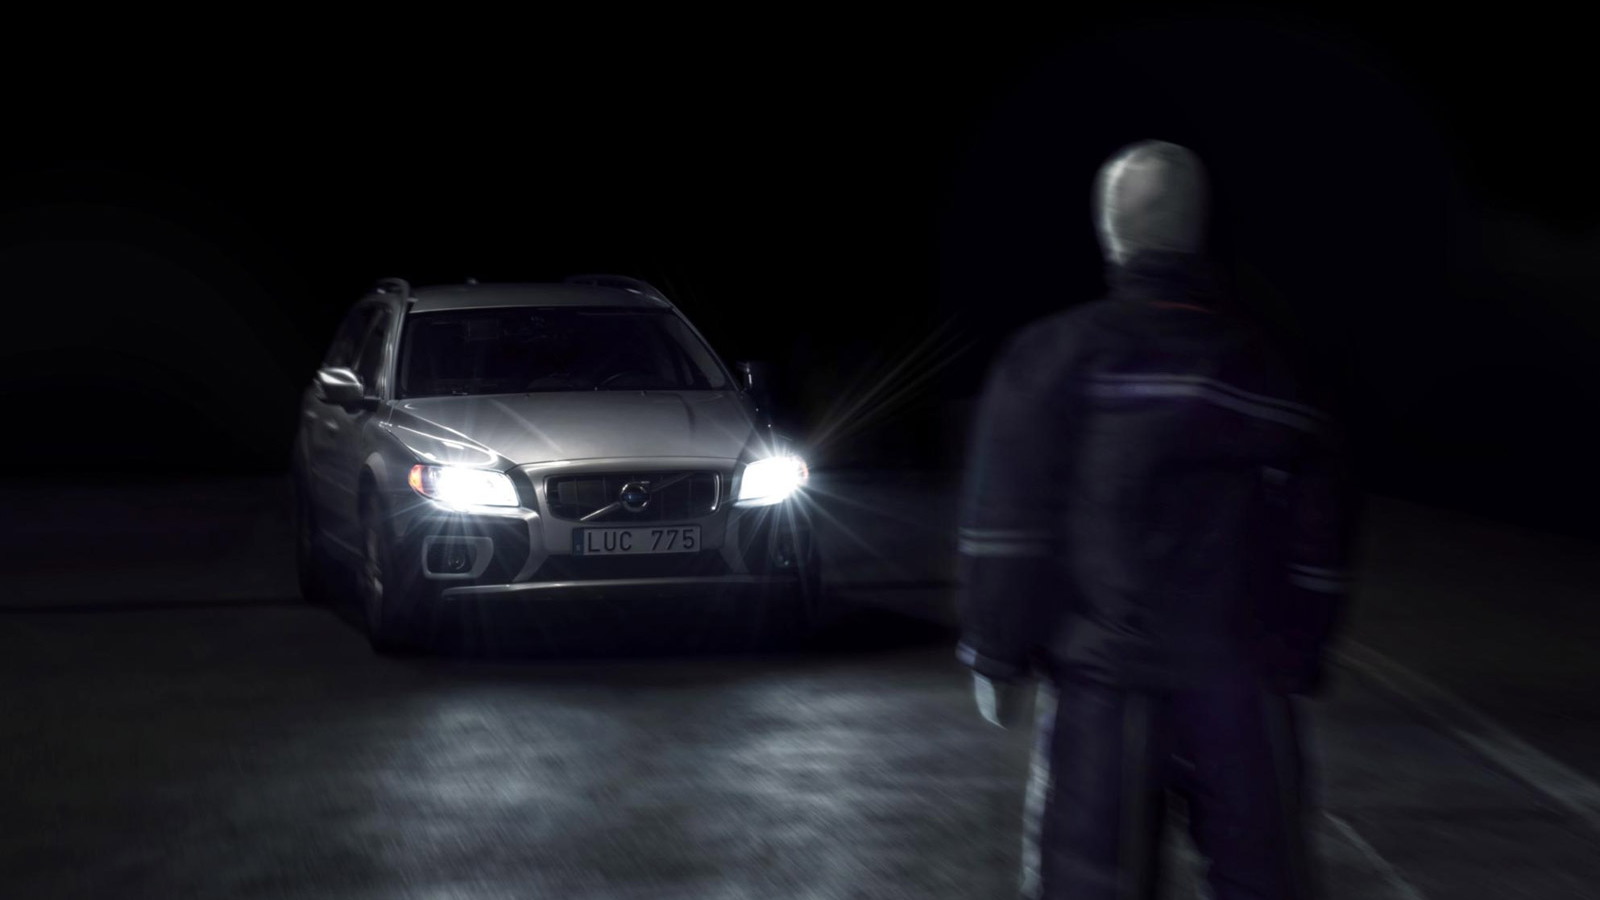 Safety technology planned for 2016 Volvo XC90